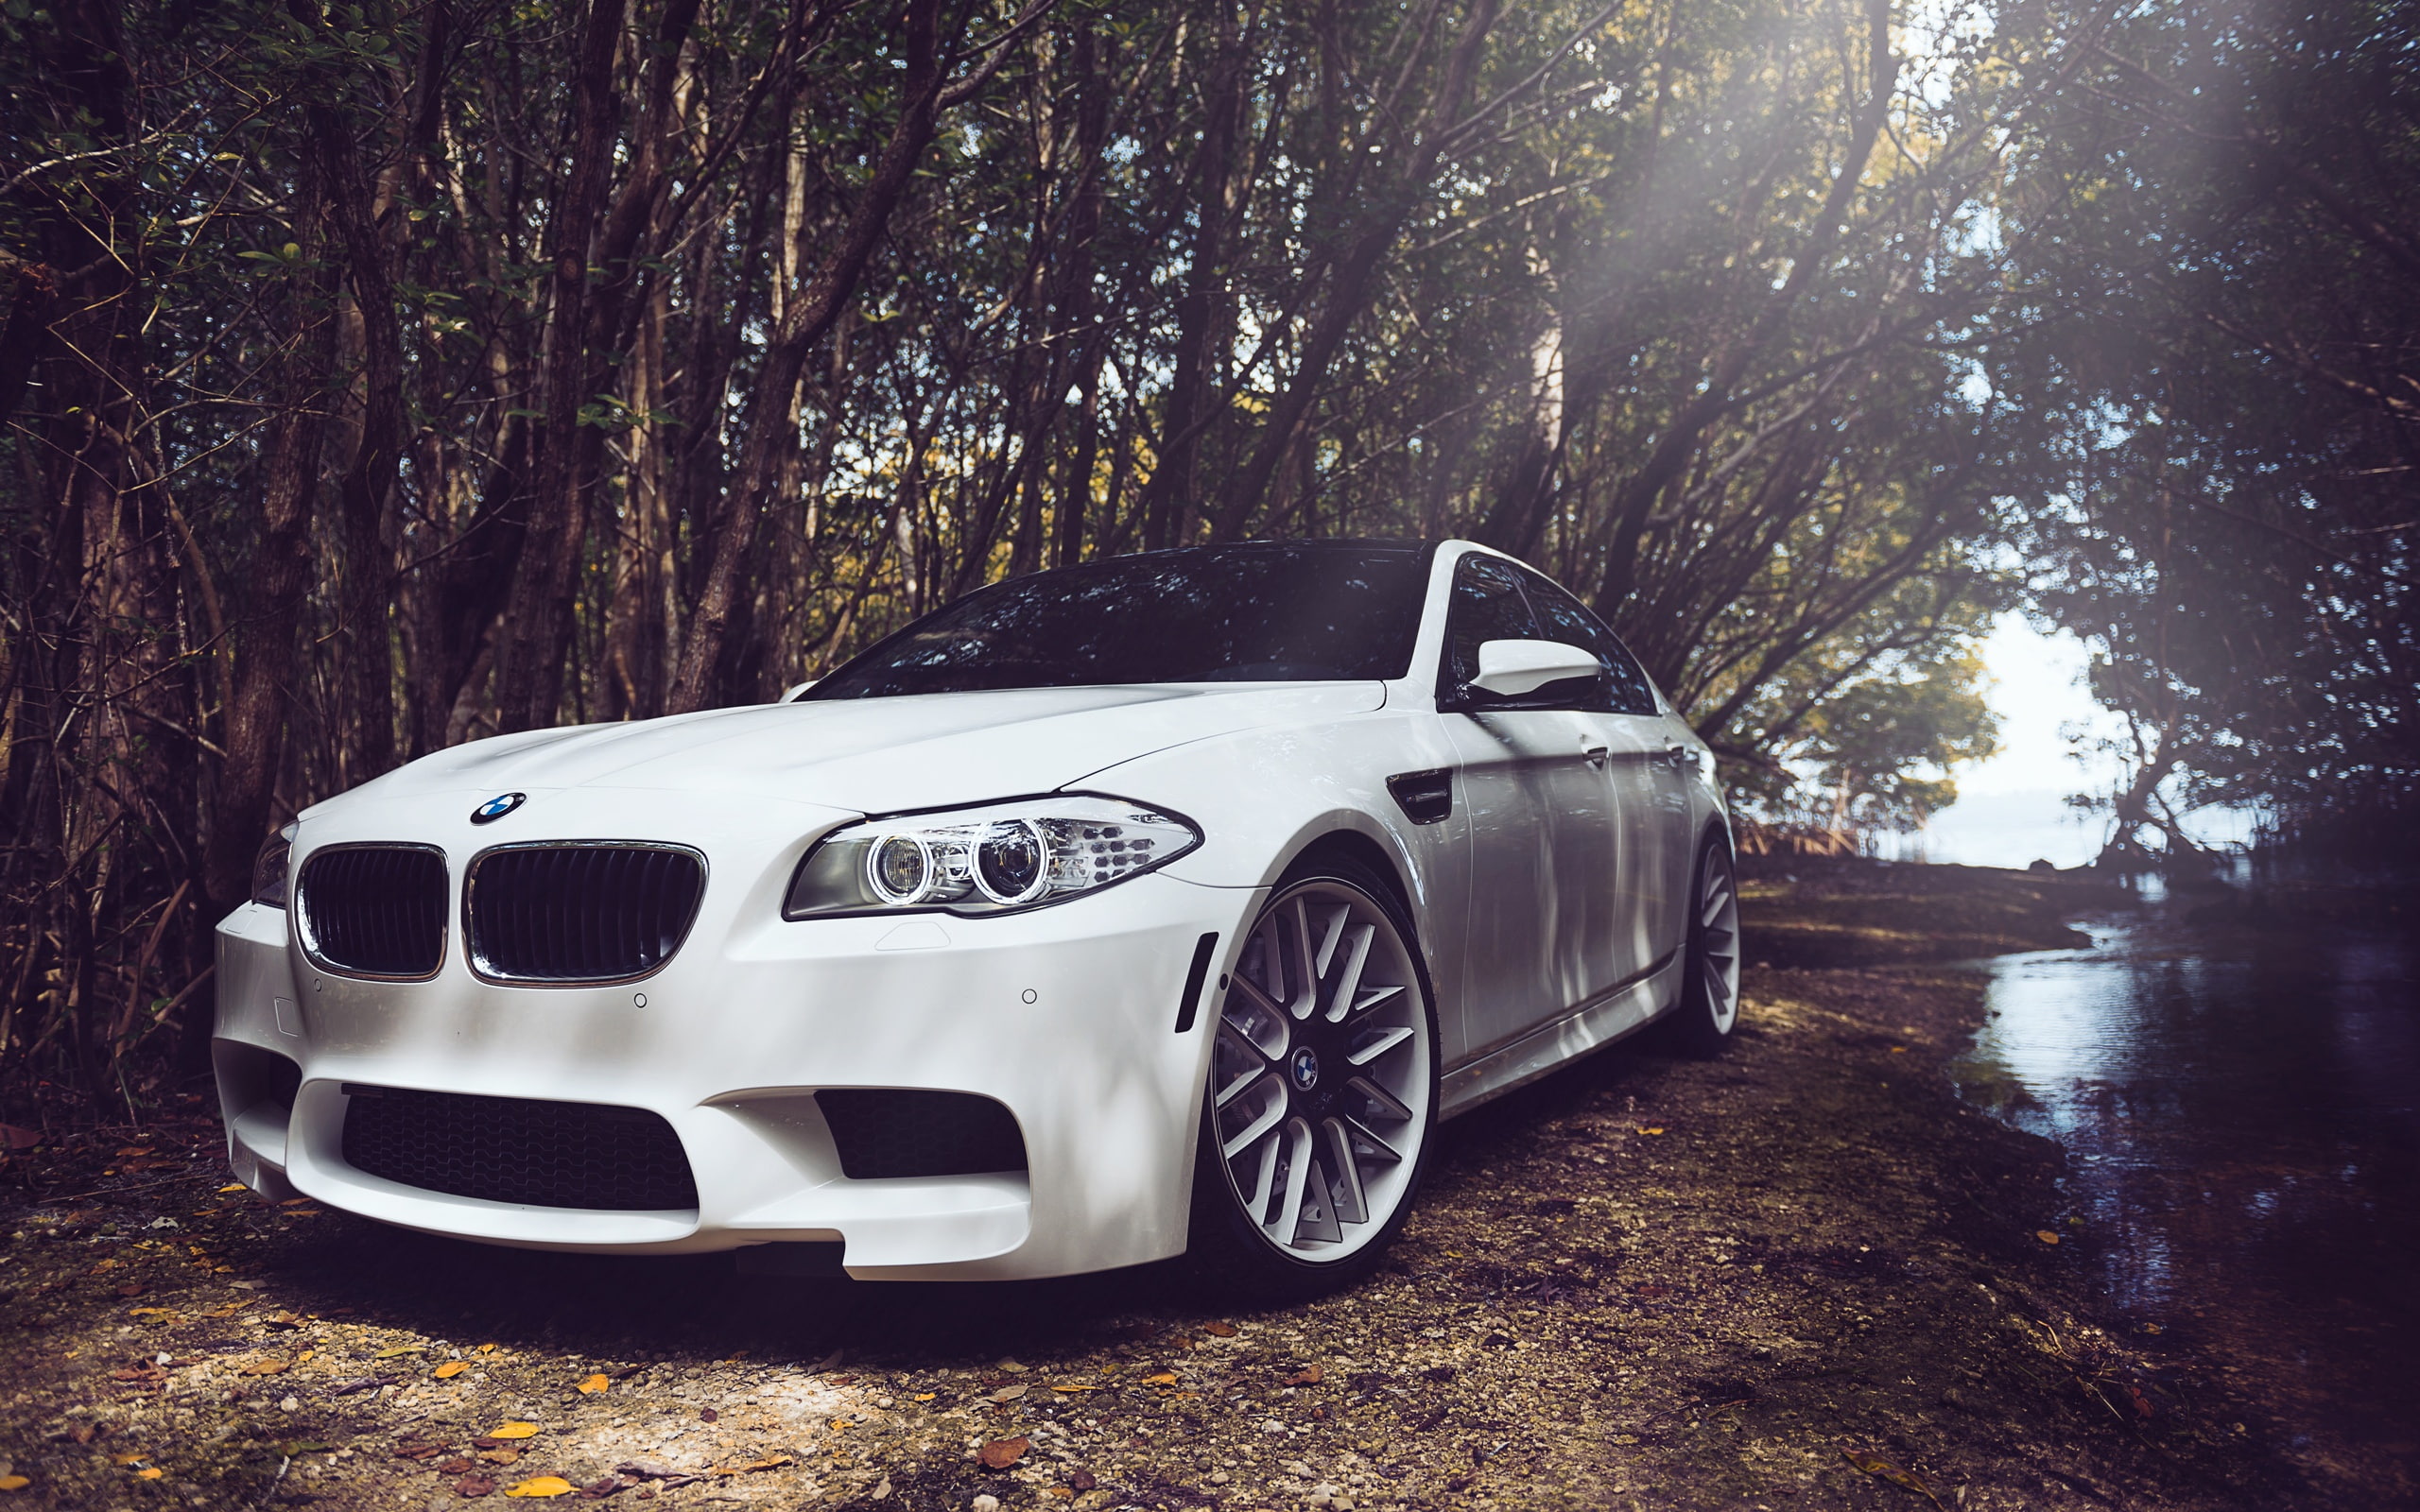 BMW M5 F10 white car in forest